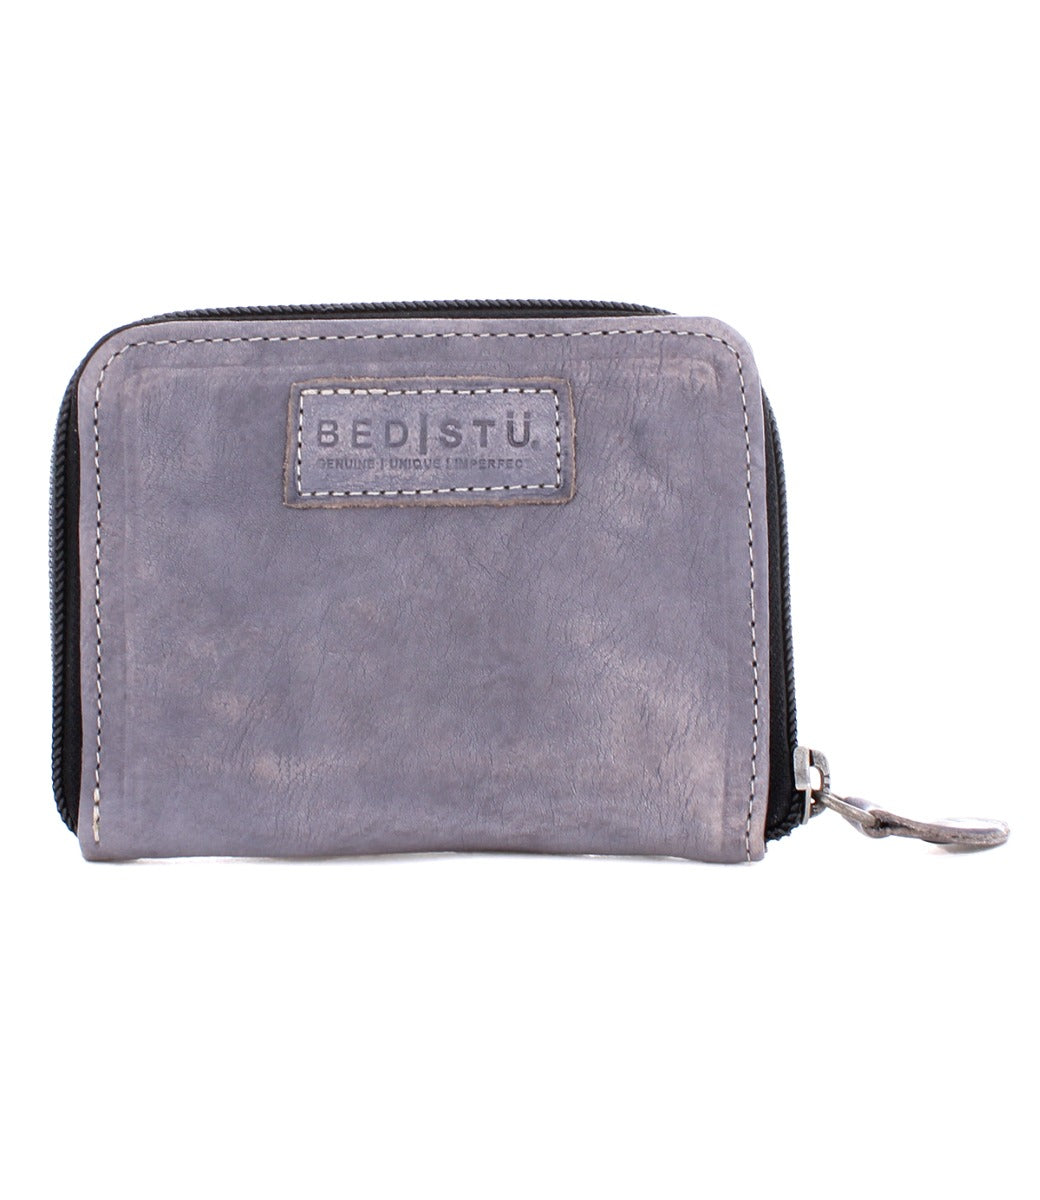 A grey leather Ozzie wallet from Bed Stu with a zipper.